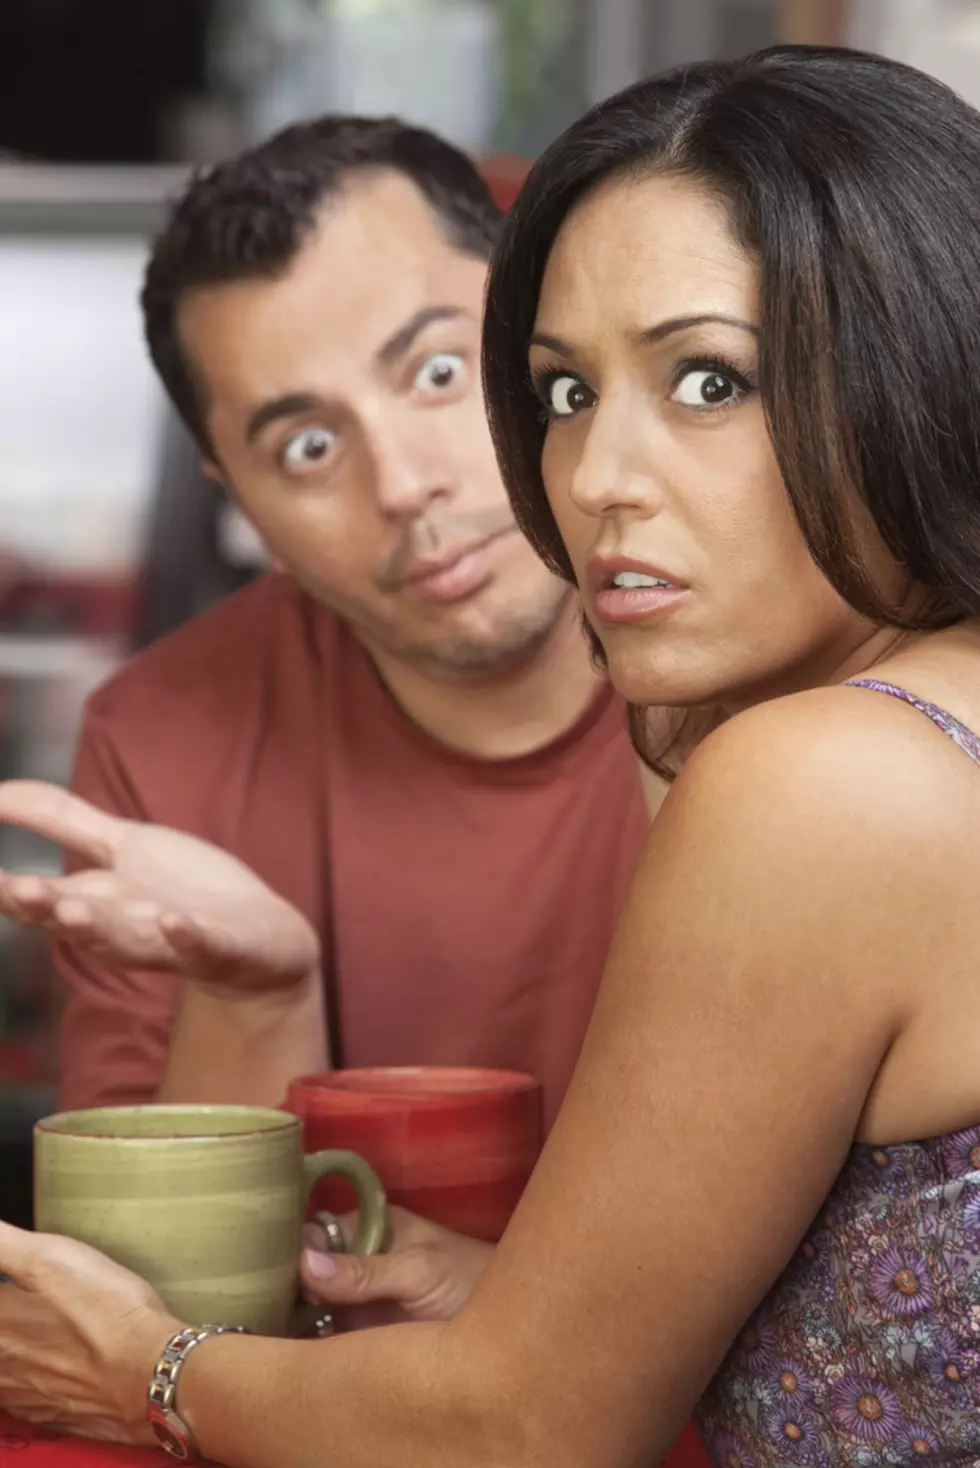 Signs You And Your Partner May Not Be A Good Match